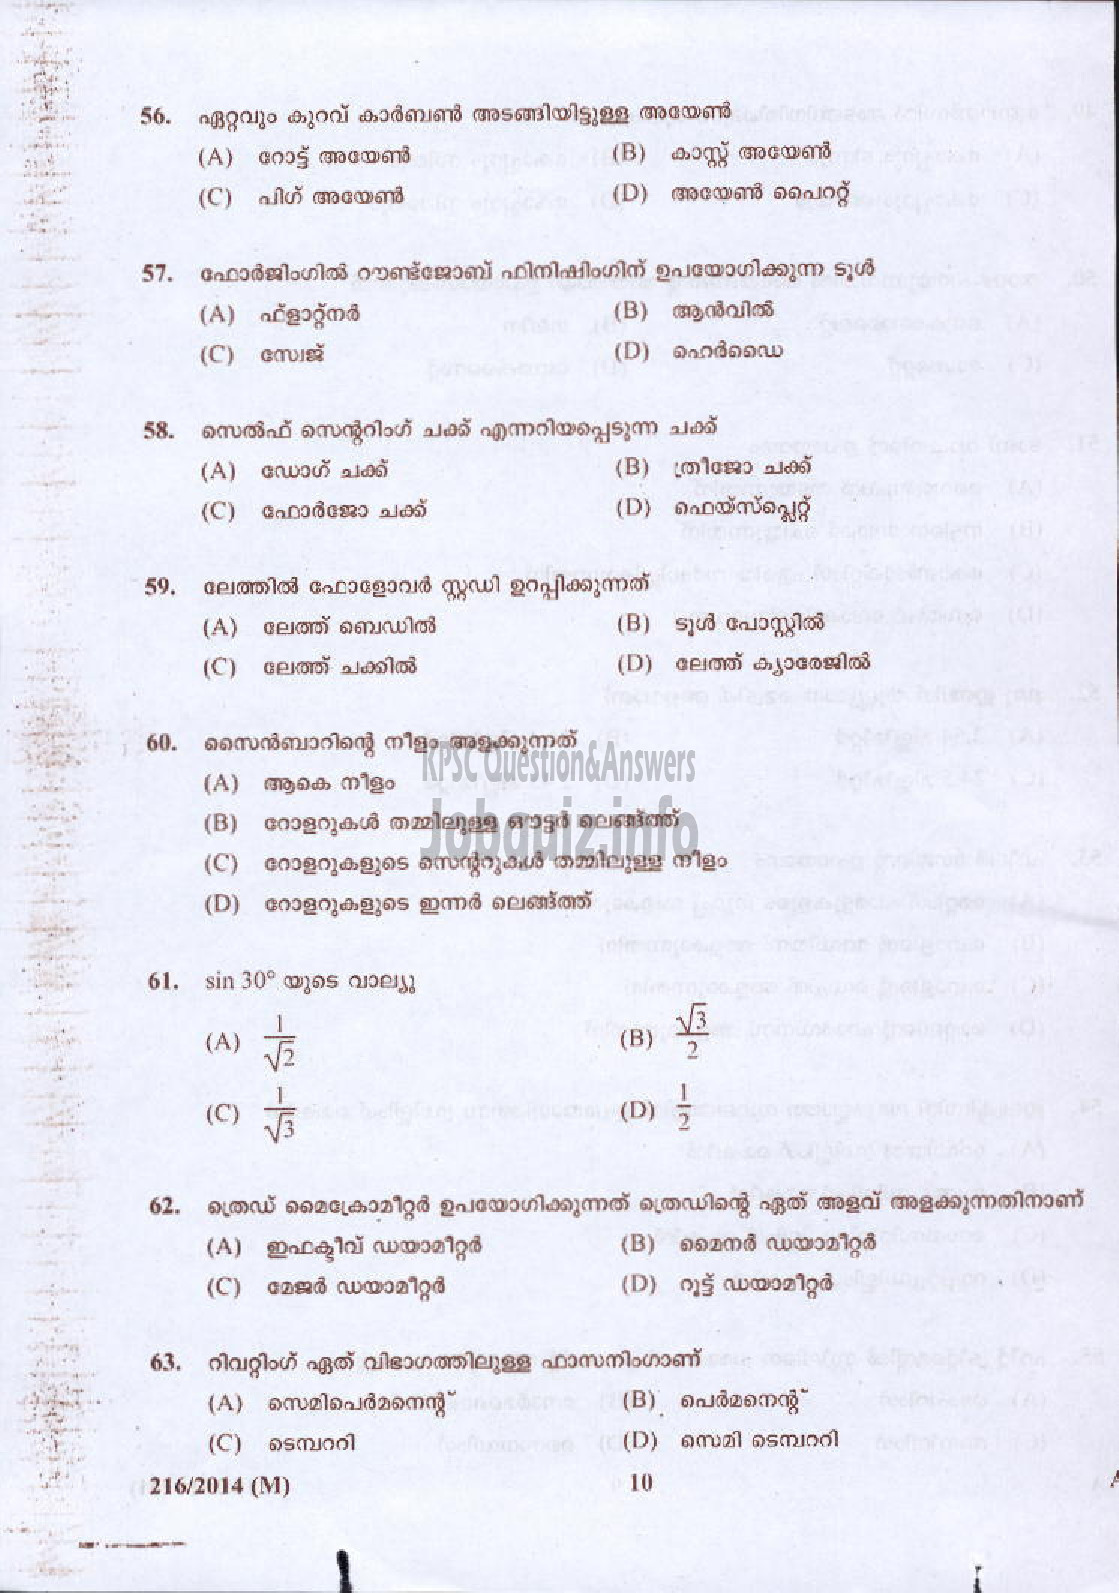 Kerala PSC Question Paper - FITTER AGRICULTURE-10